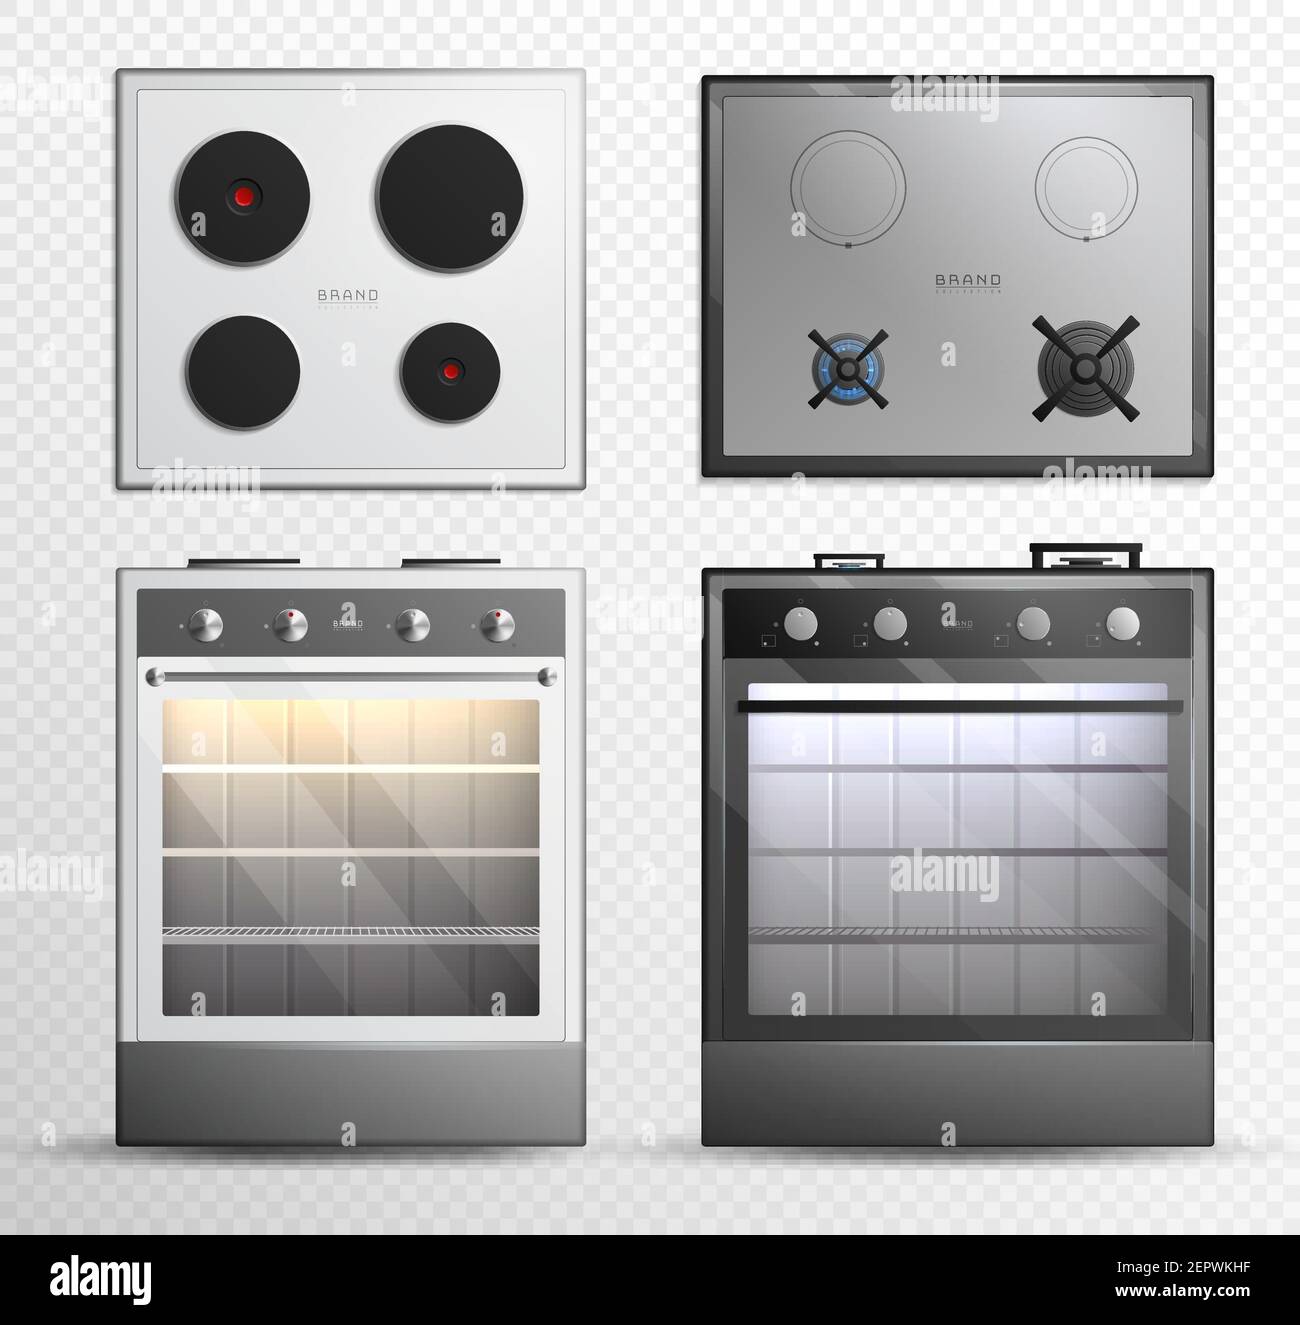 Gas electric cook top stove icon set with different style shape and color vector illustration Stock Vector